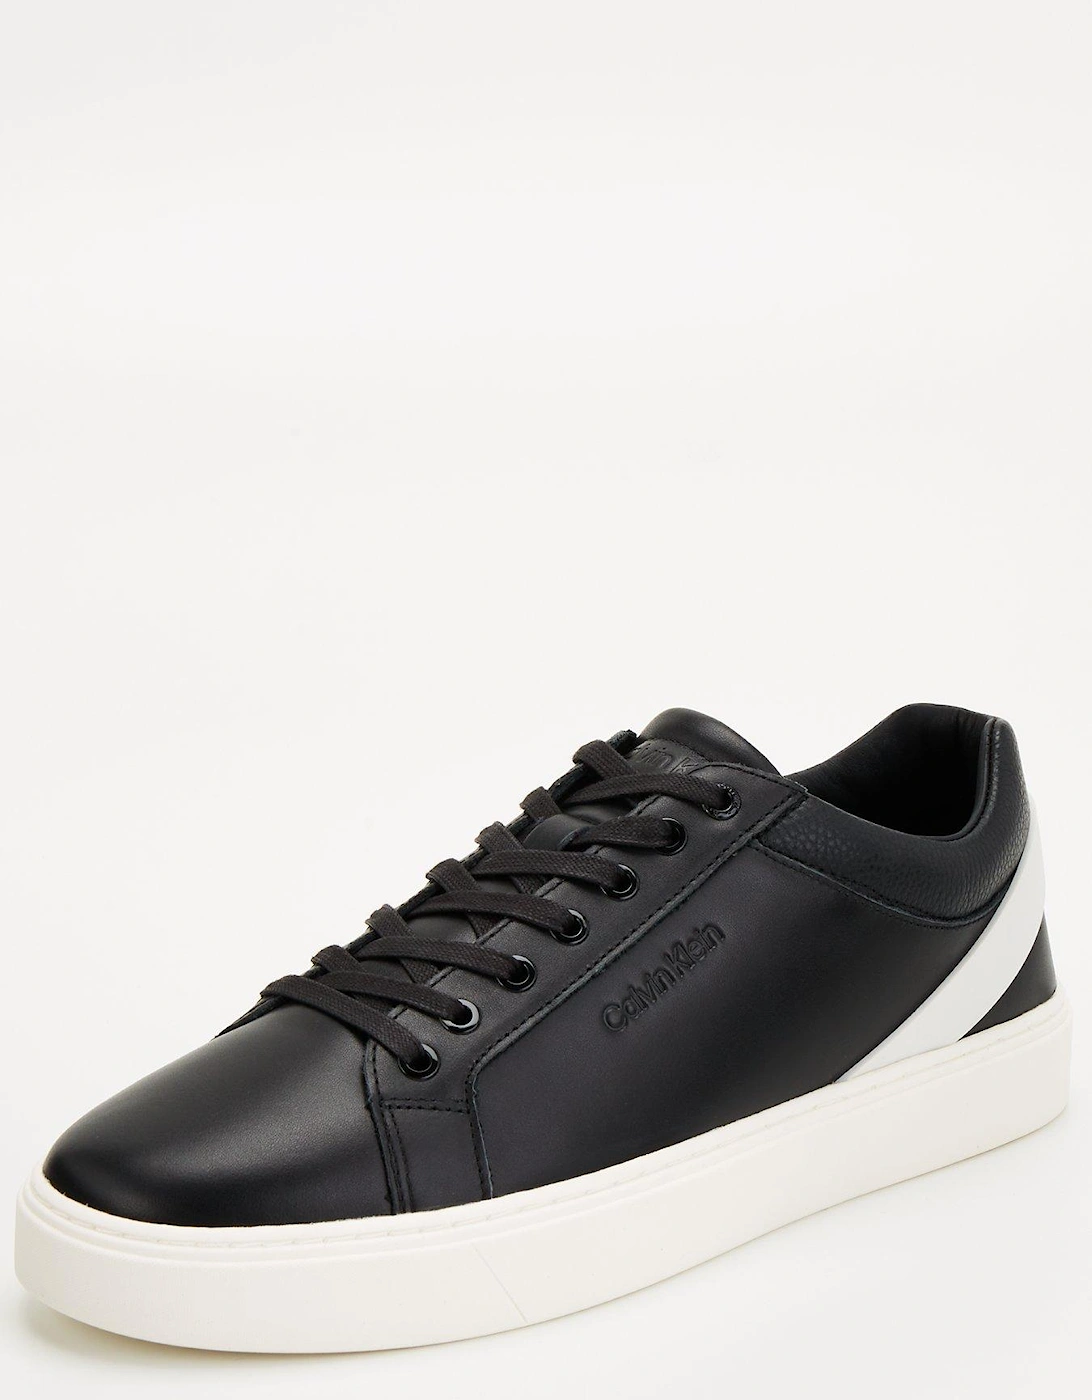 Low Top Lace Up Archive Stripe Trainer - Black/white